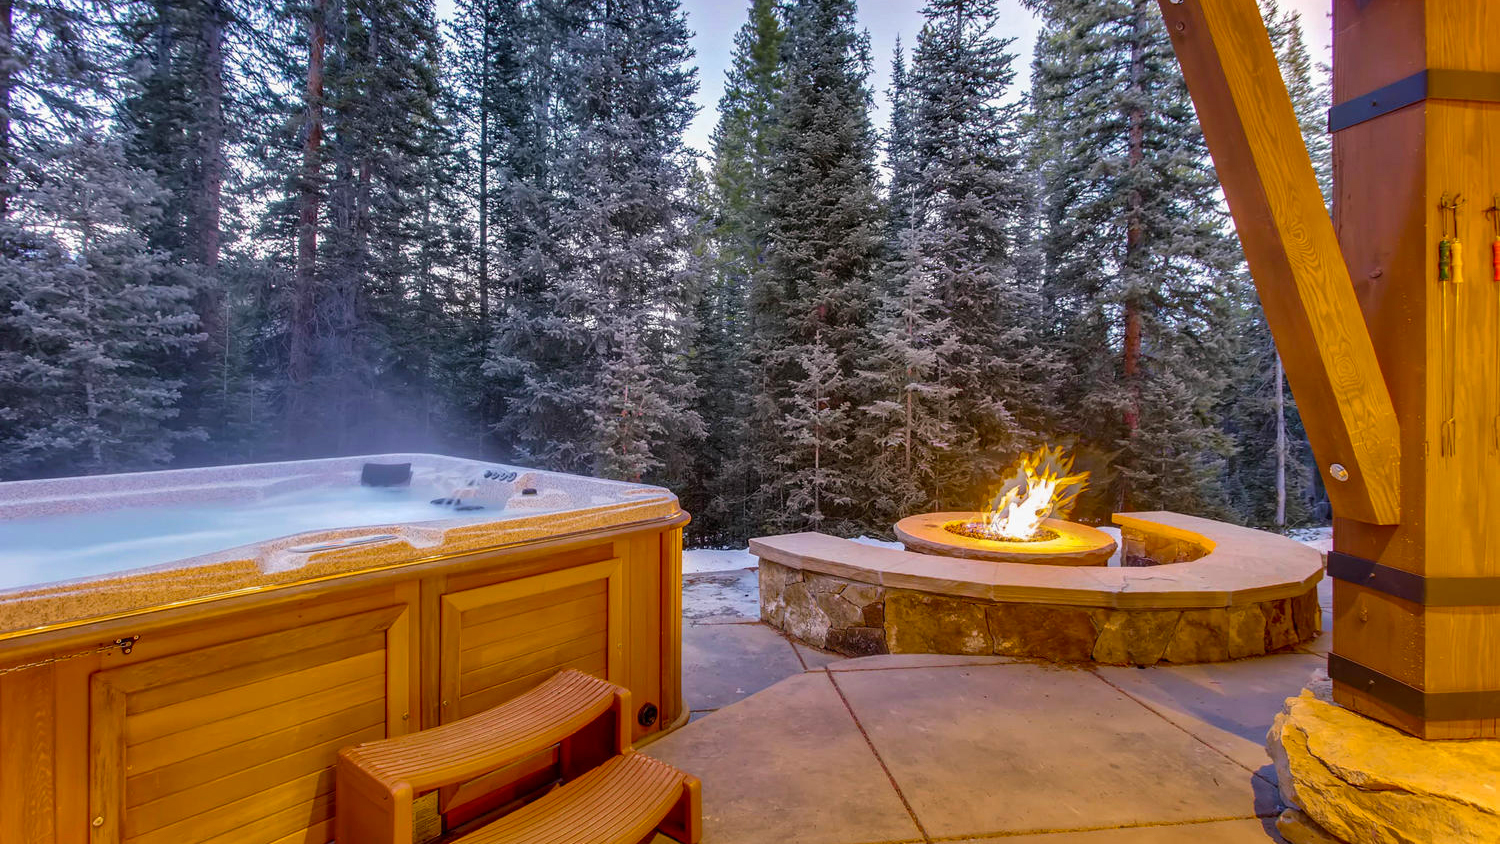 Hot tub and firepit on back patio